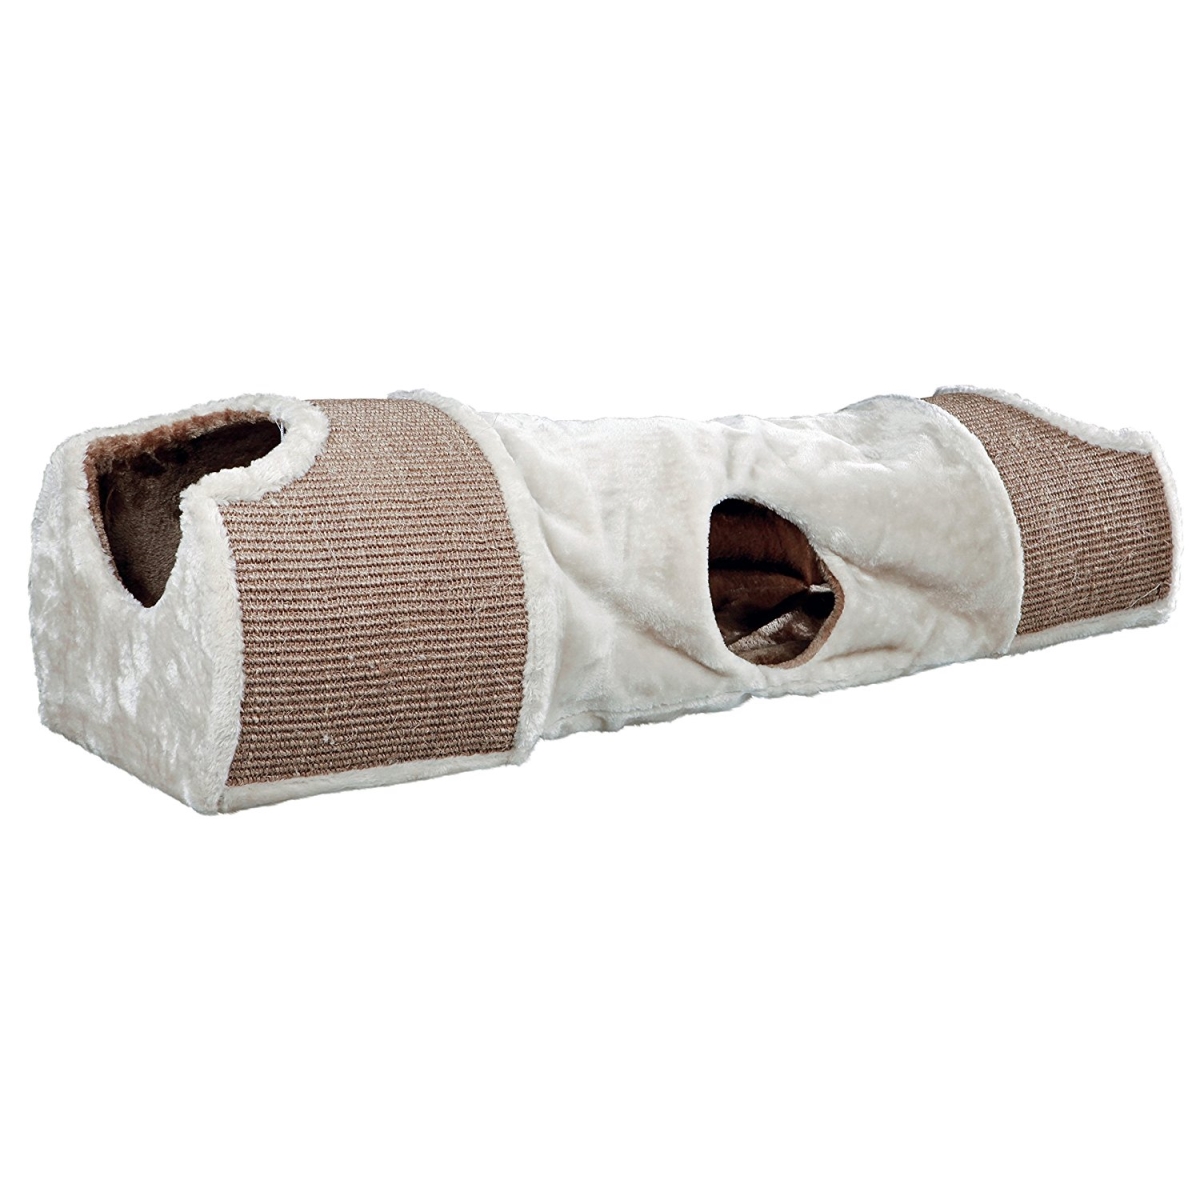 Picture of Trixie Pet Products 43004 Plush Nesting Tunnel for Cats, Light Gray & Brown